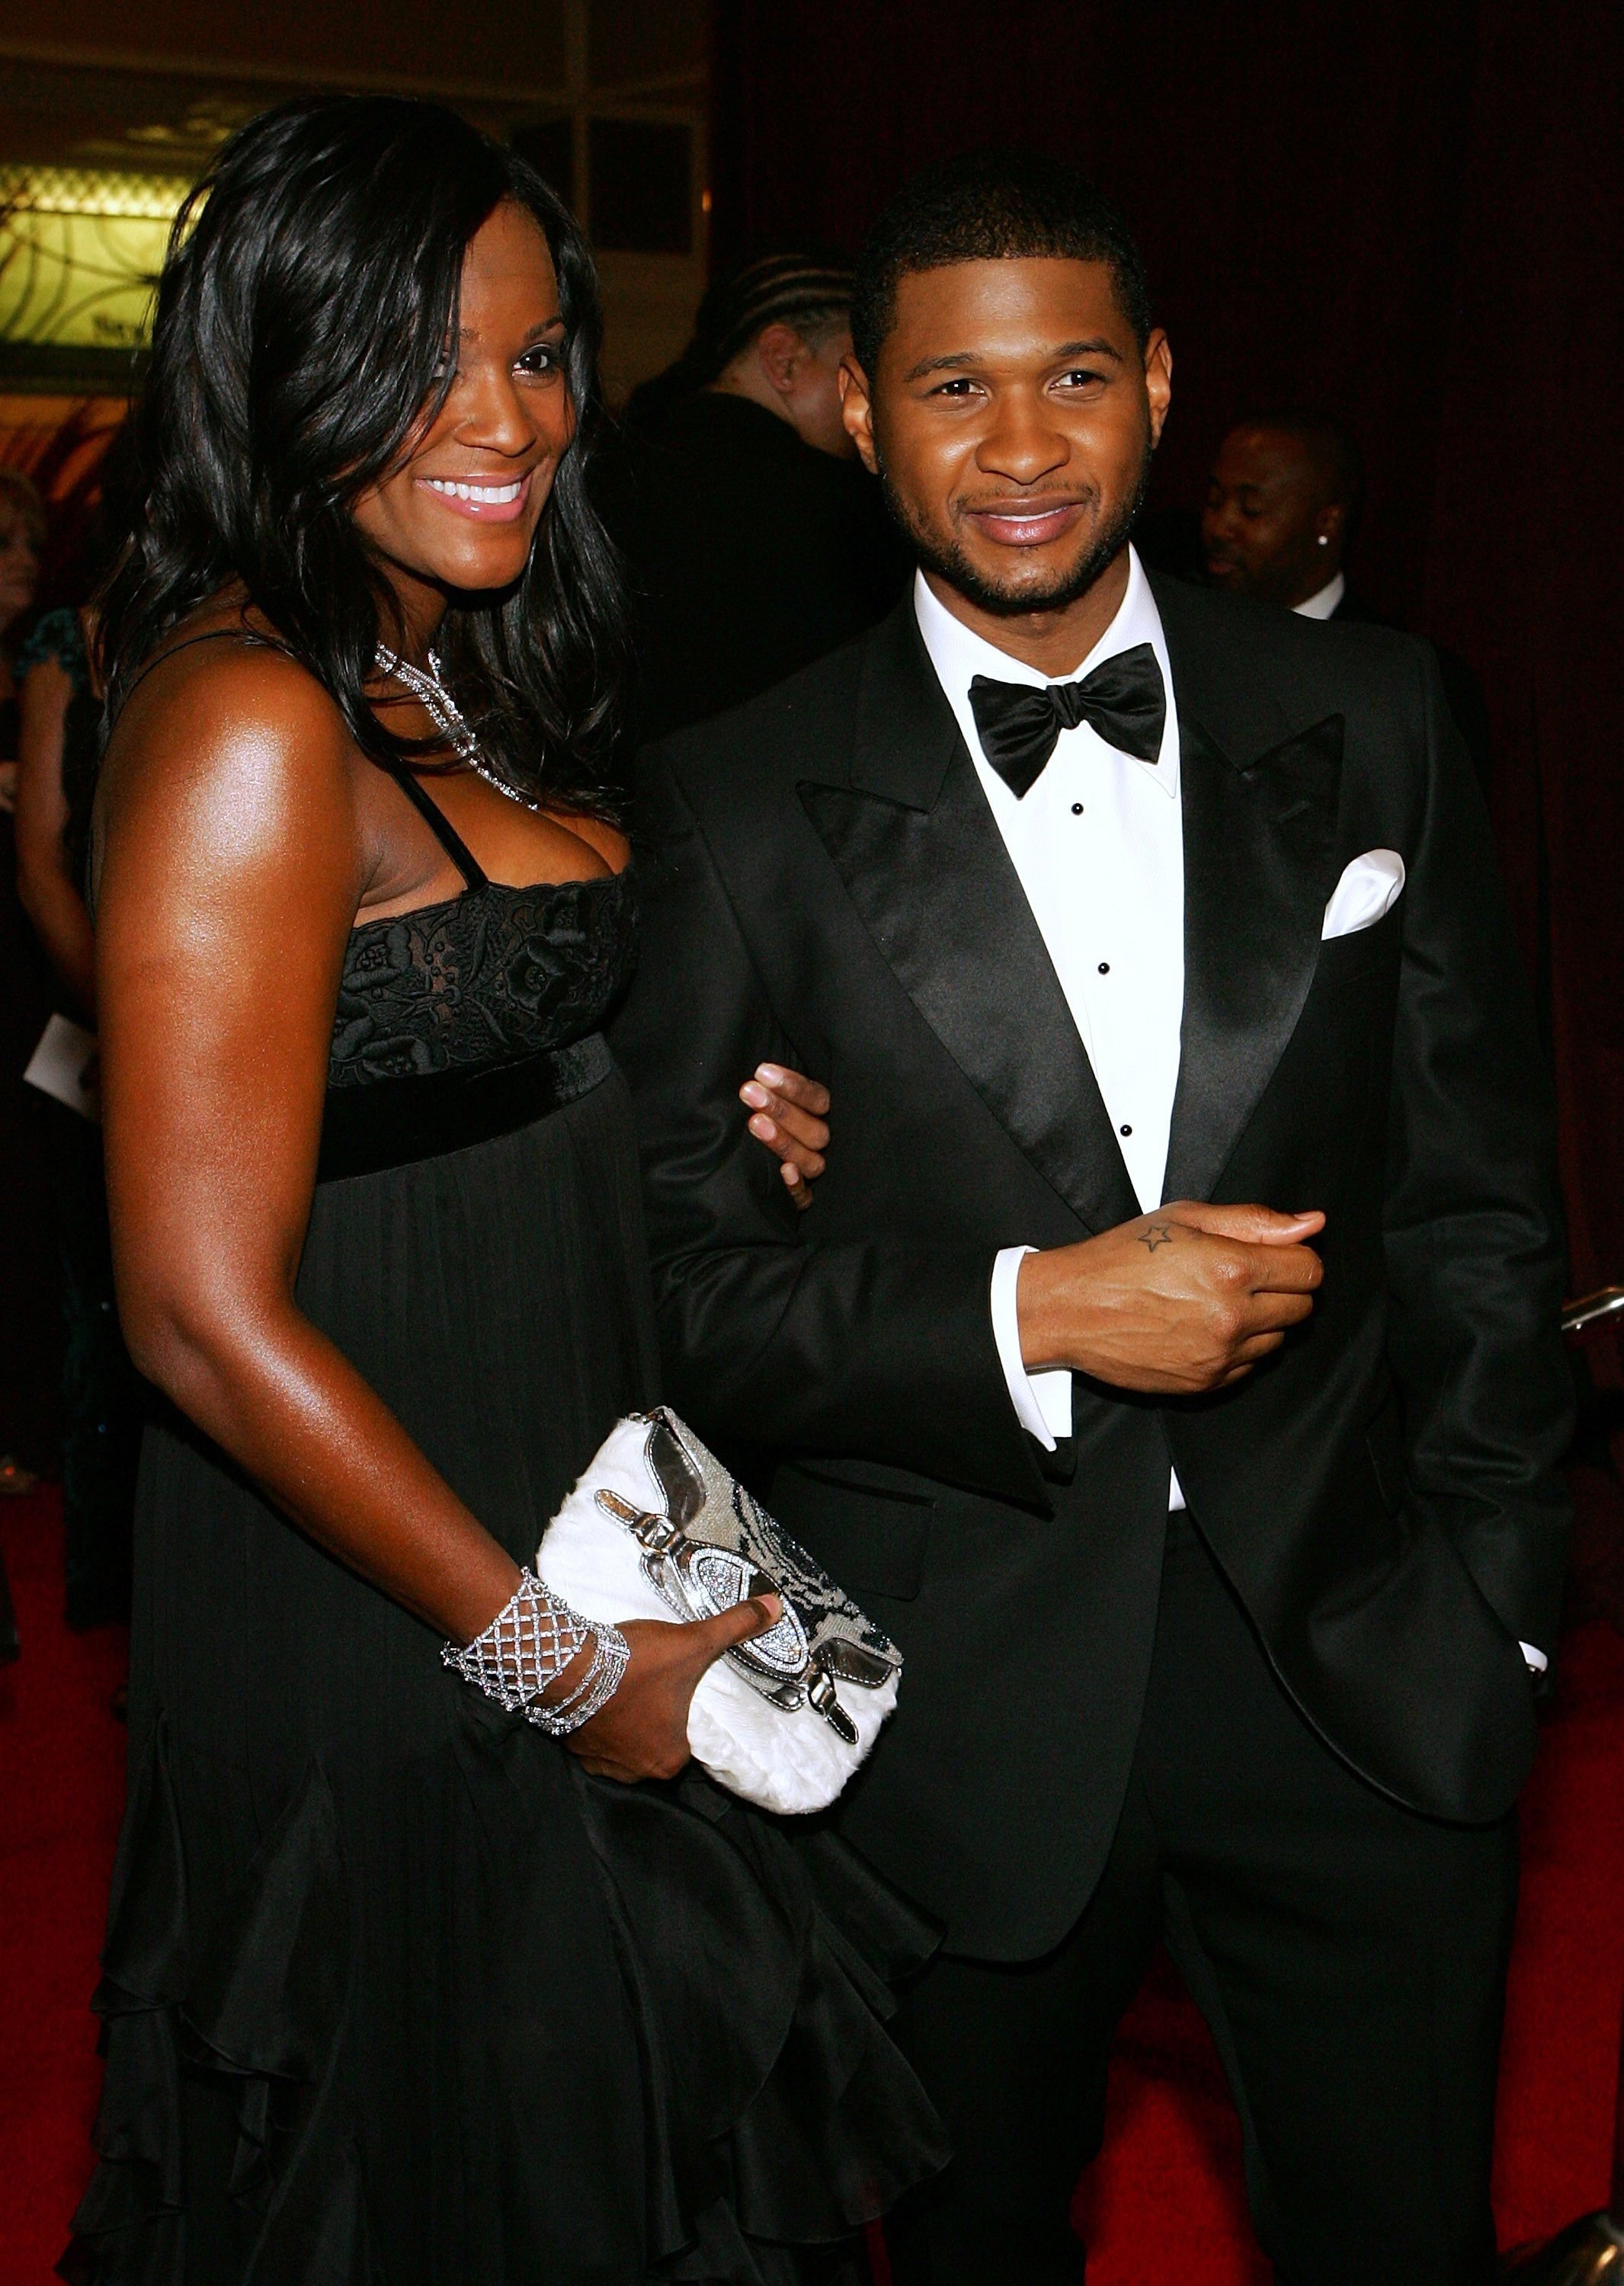 Usher Raymond and Tameka Foster attend the 15th annual Trumpet Awards at the Bellagio January 22, 2007 in Las Vegas, Nevada. | Source: Getty Images